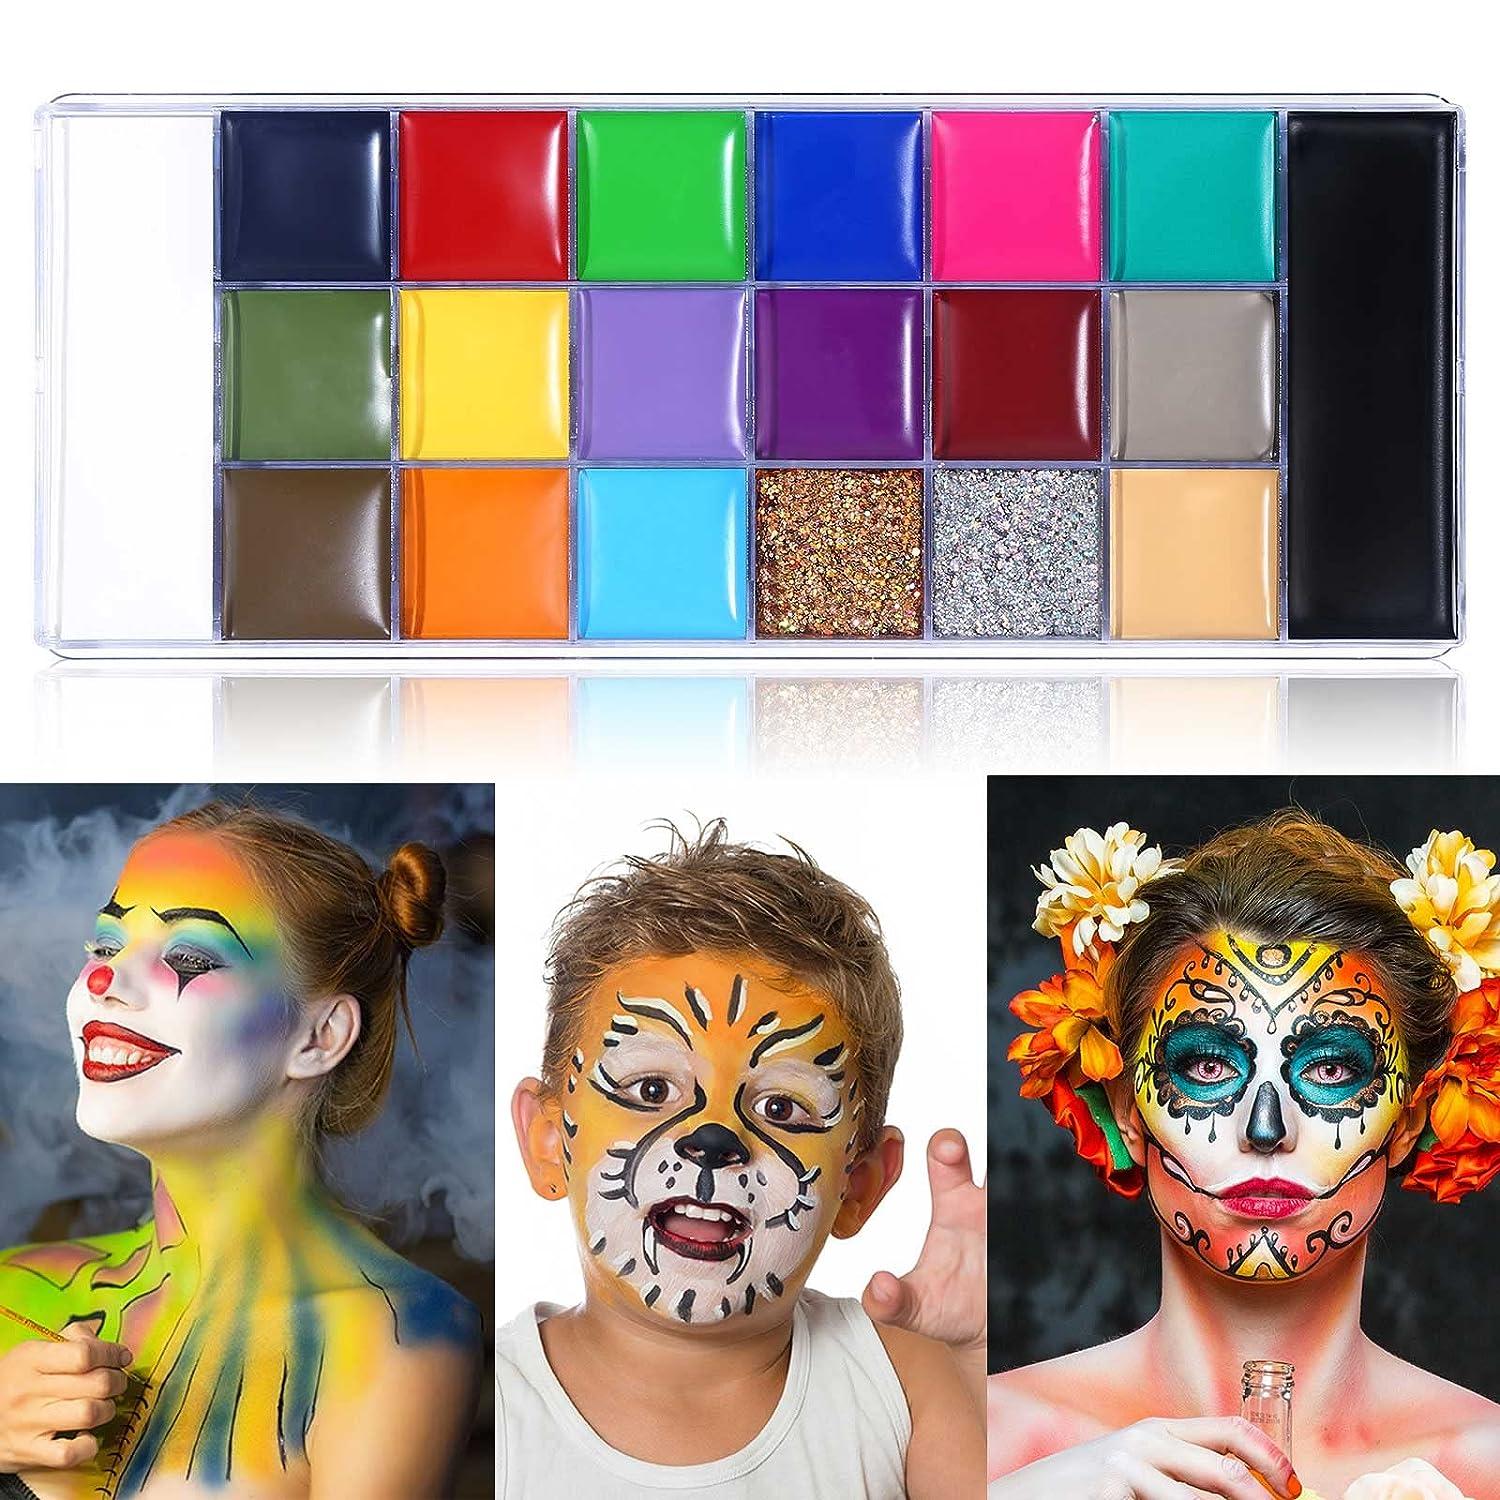 15 Color Face Paint Kit, Professional Face Painting Kit SFX Makeup Palette,  Water Activated Body Paint for Cosplay Halloween Party for Kids and Adults